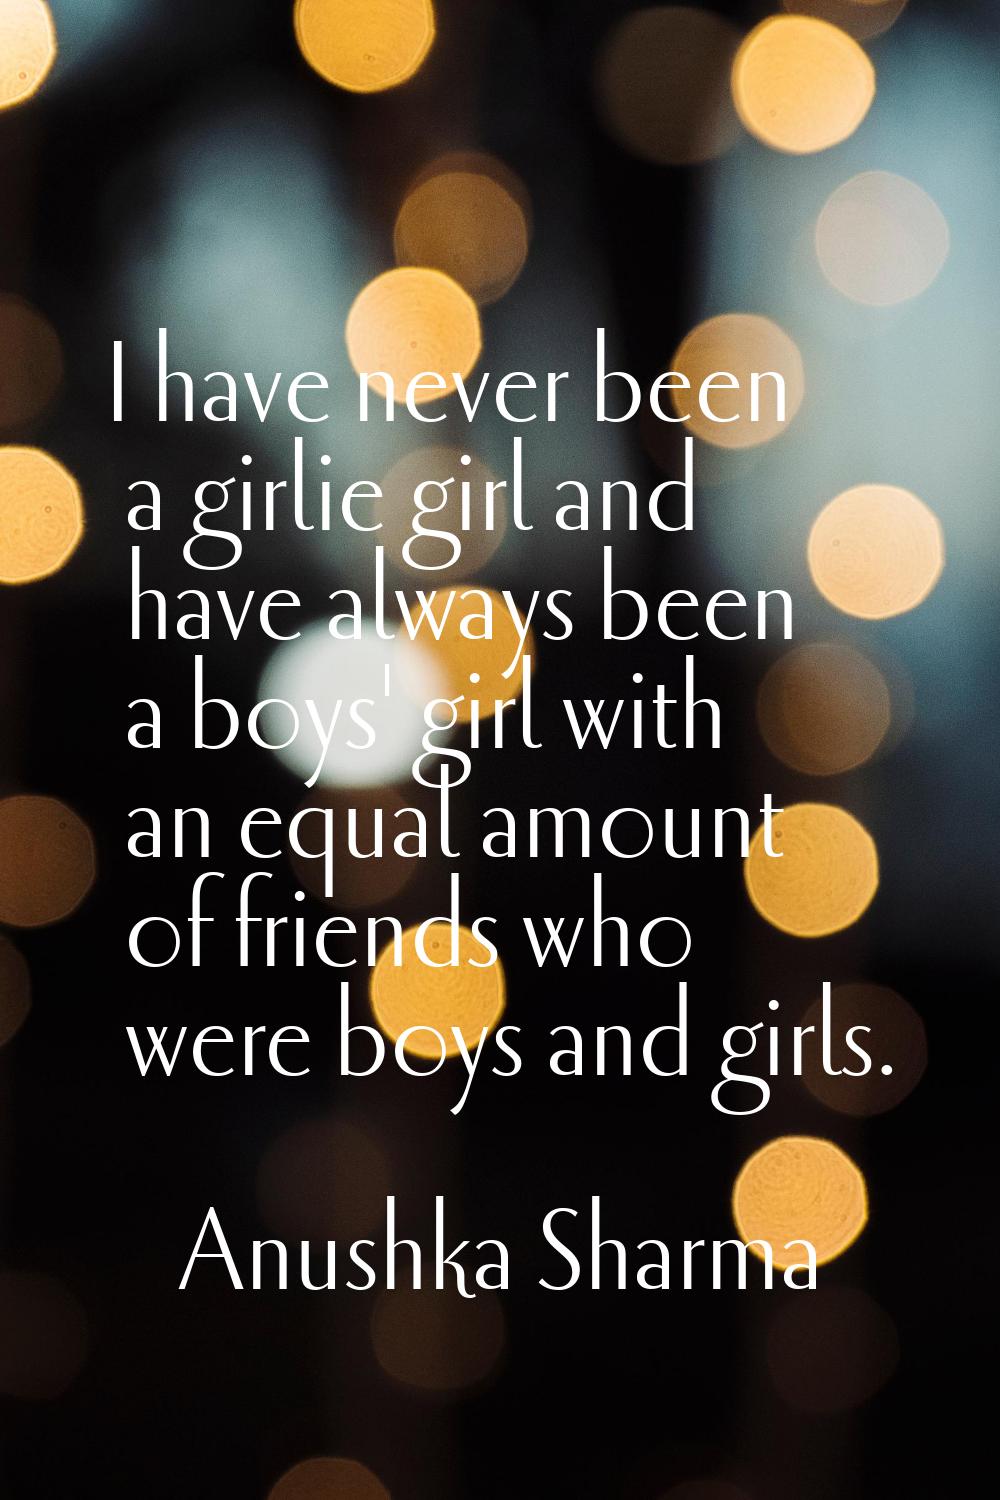 I have never been a girlie girl and have always been a boys' girl with an equal amount of friends w